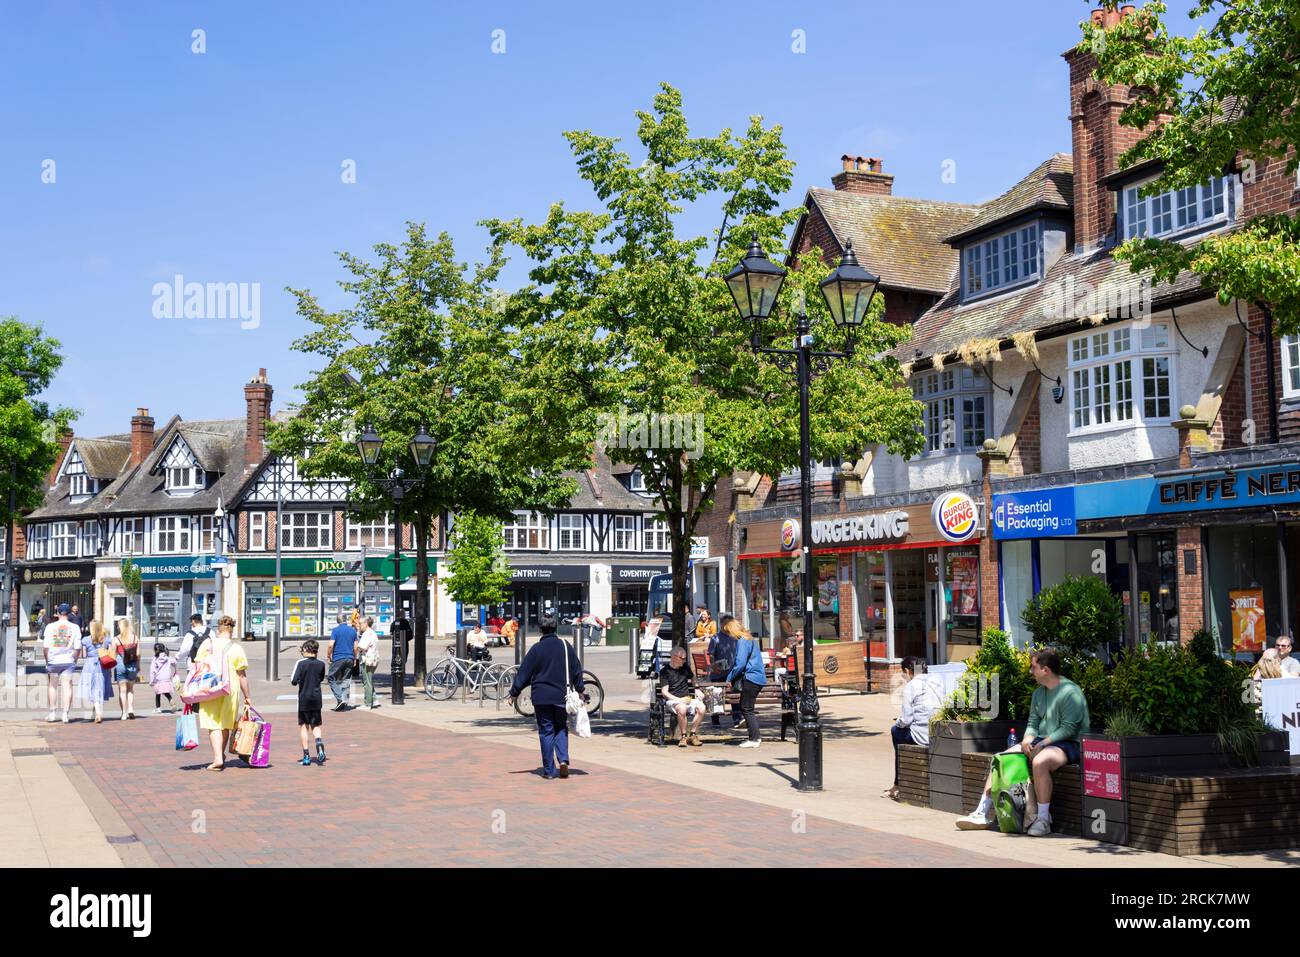 Centre-ville de Solihull shopping shopping et magasins sur la rue principale à Solihull High Street Solihull West Midlands Angleterre GB Europe Banque D'Images